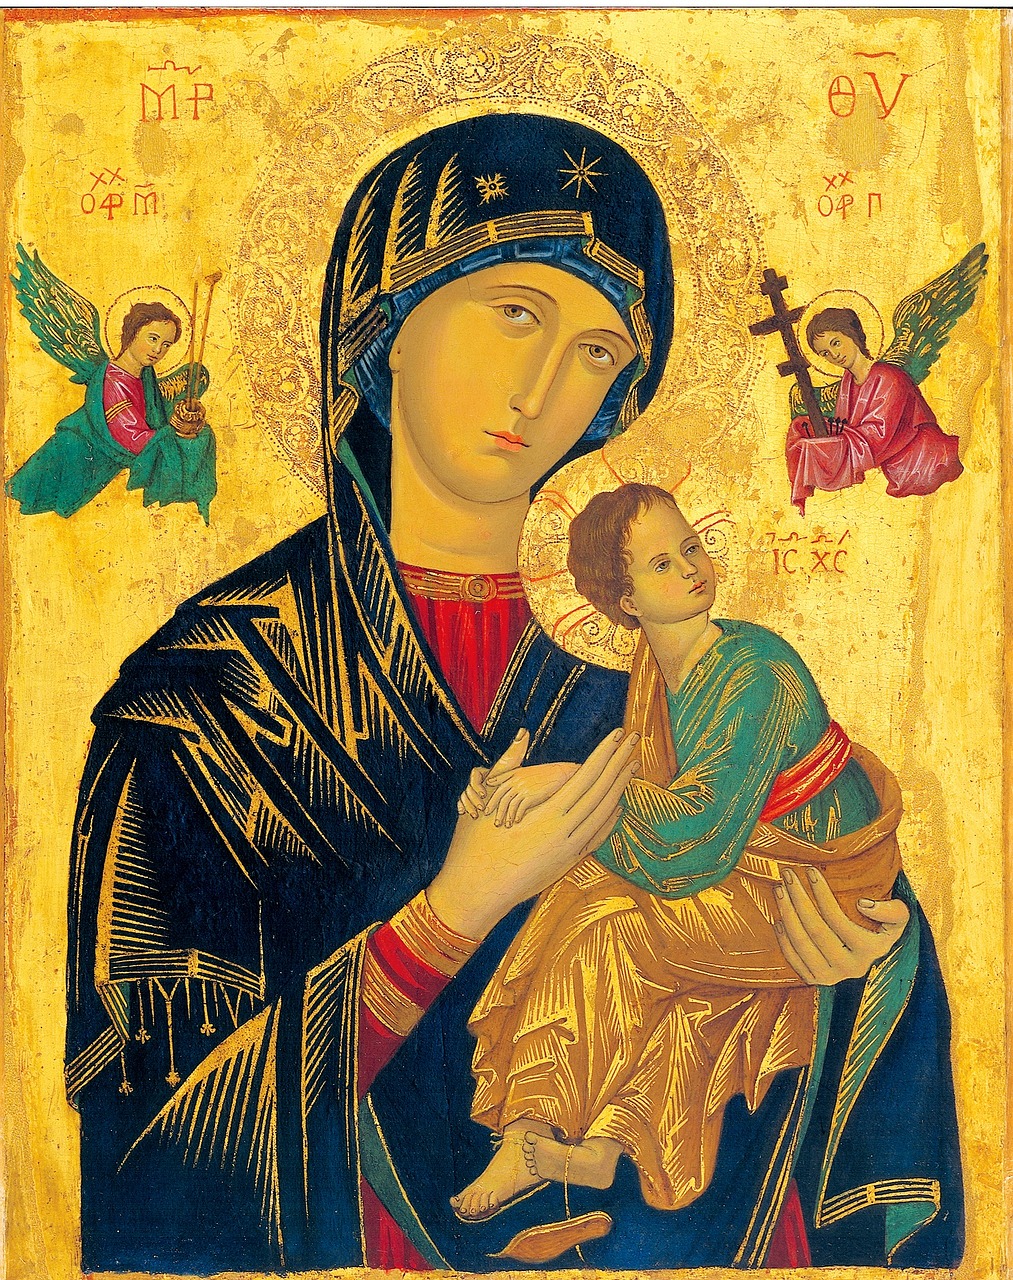 mother of perpetual help, mama mary, mother mary-1060612.jpg